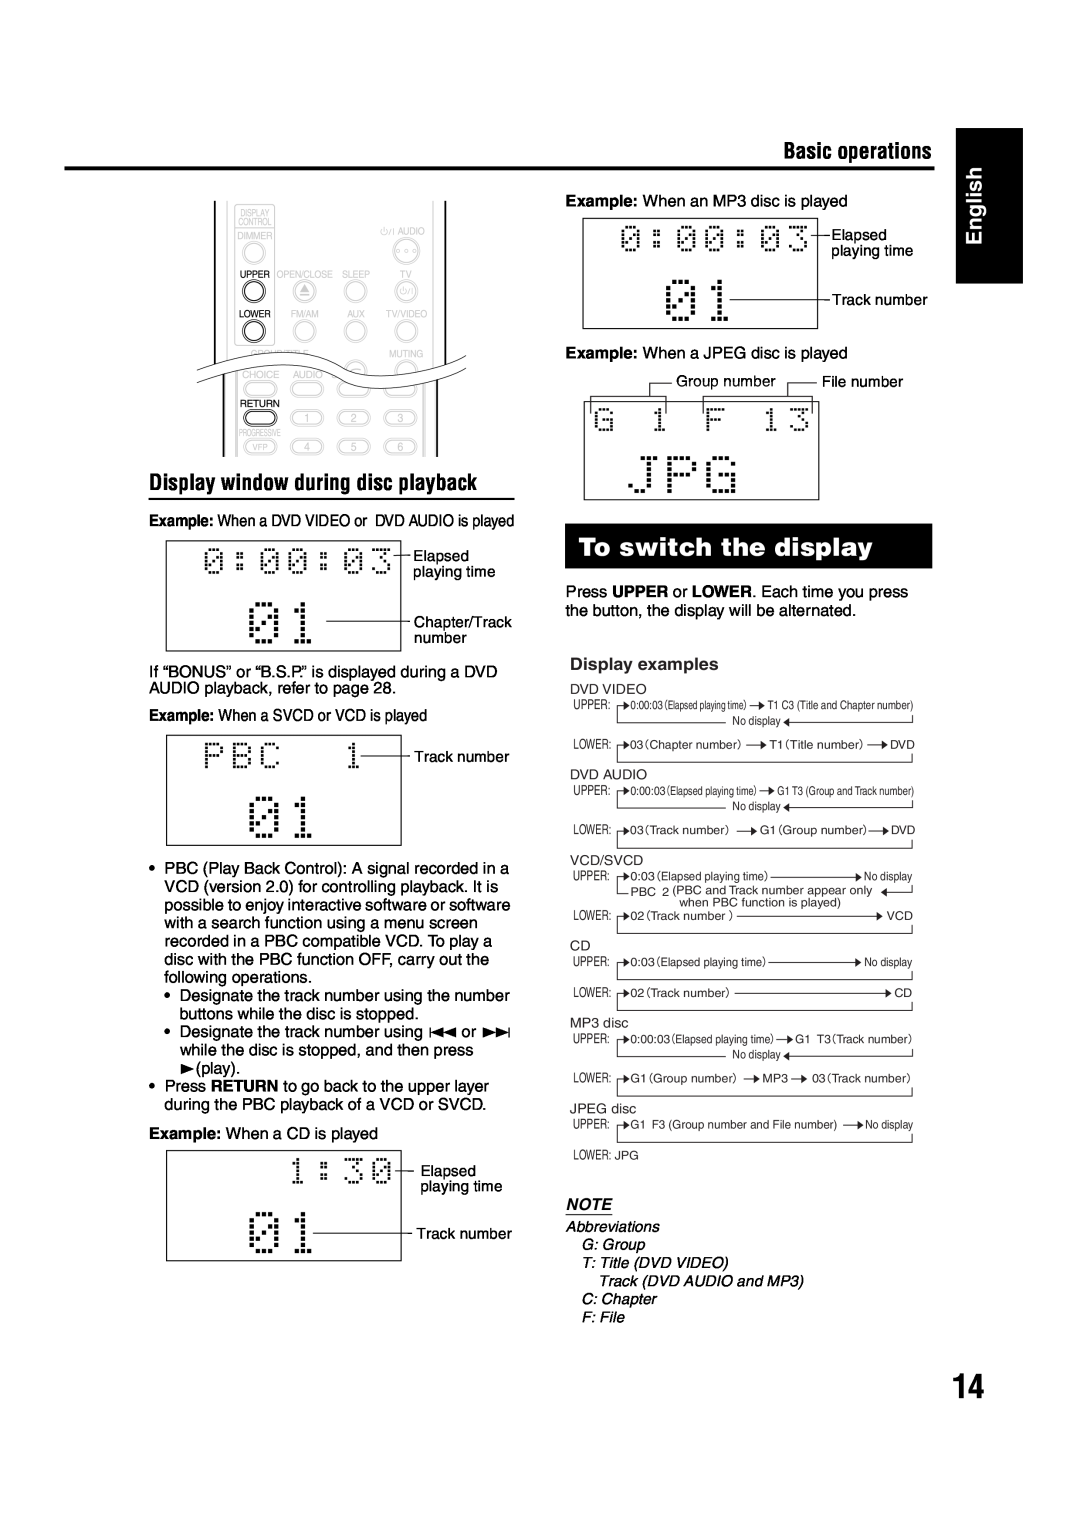 JVC EX-A1 manual To switch the display, Basic operations, English, Display window during disc playback, Display examples 